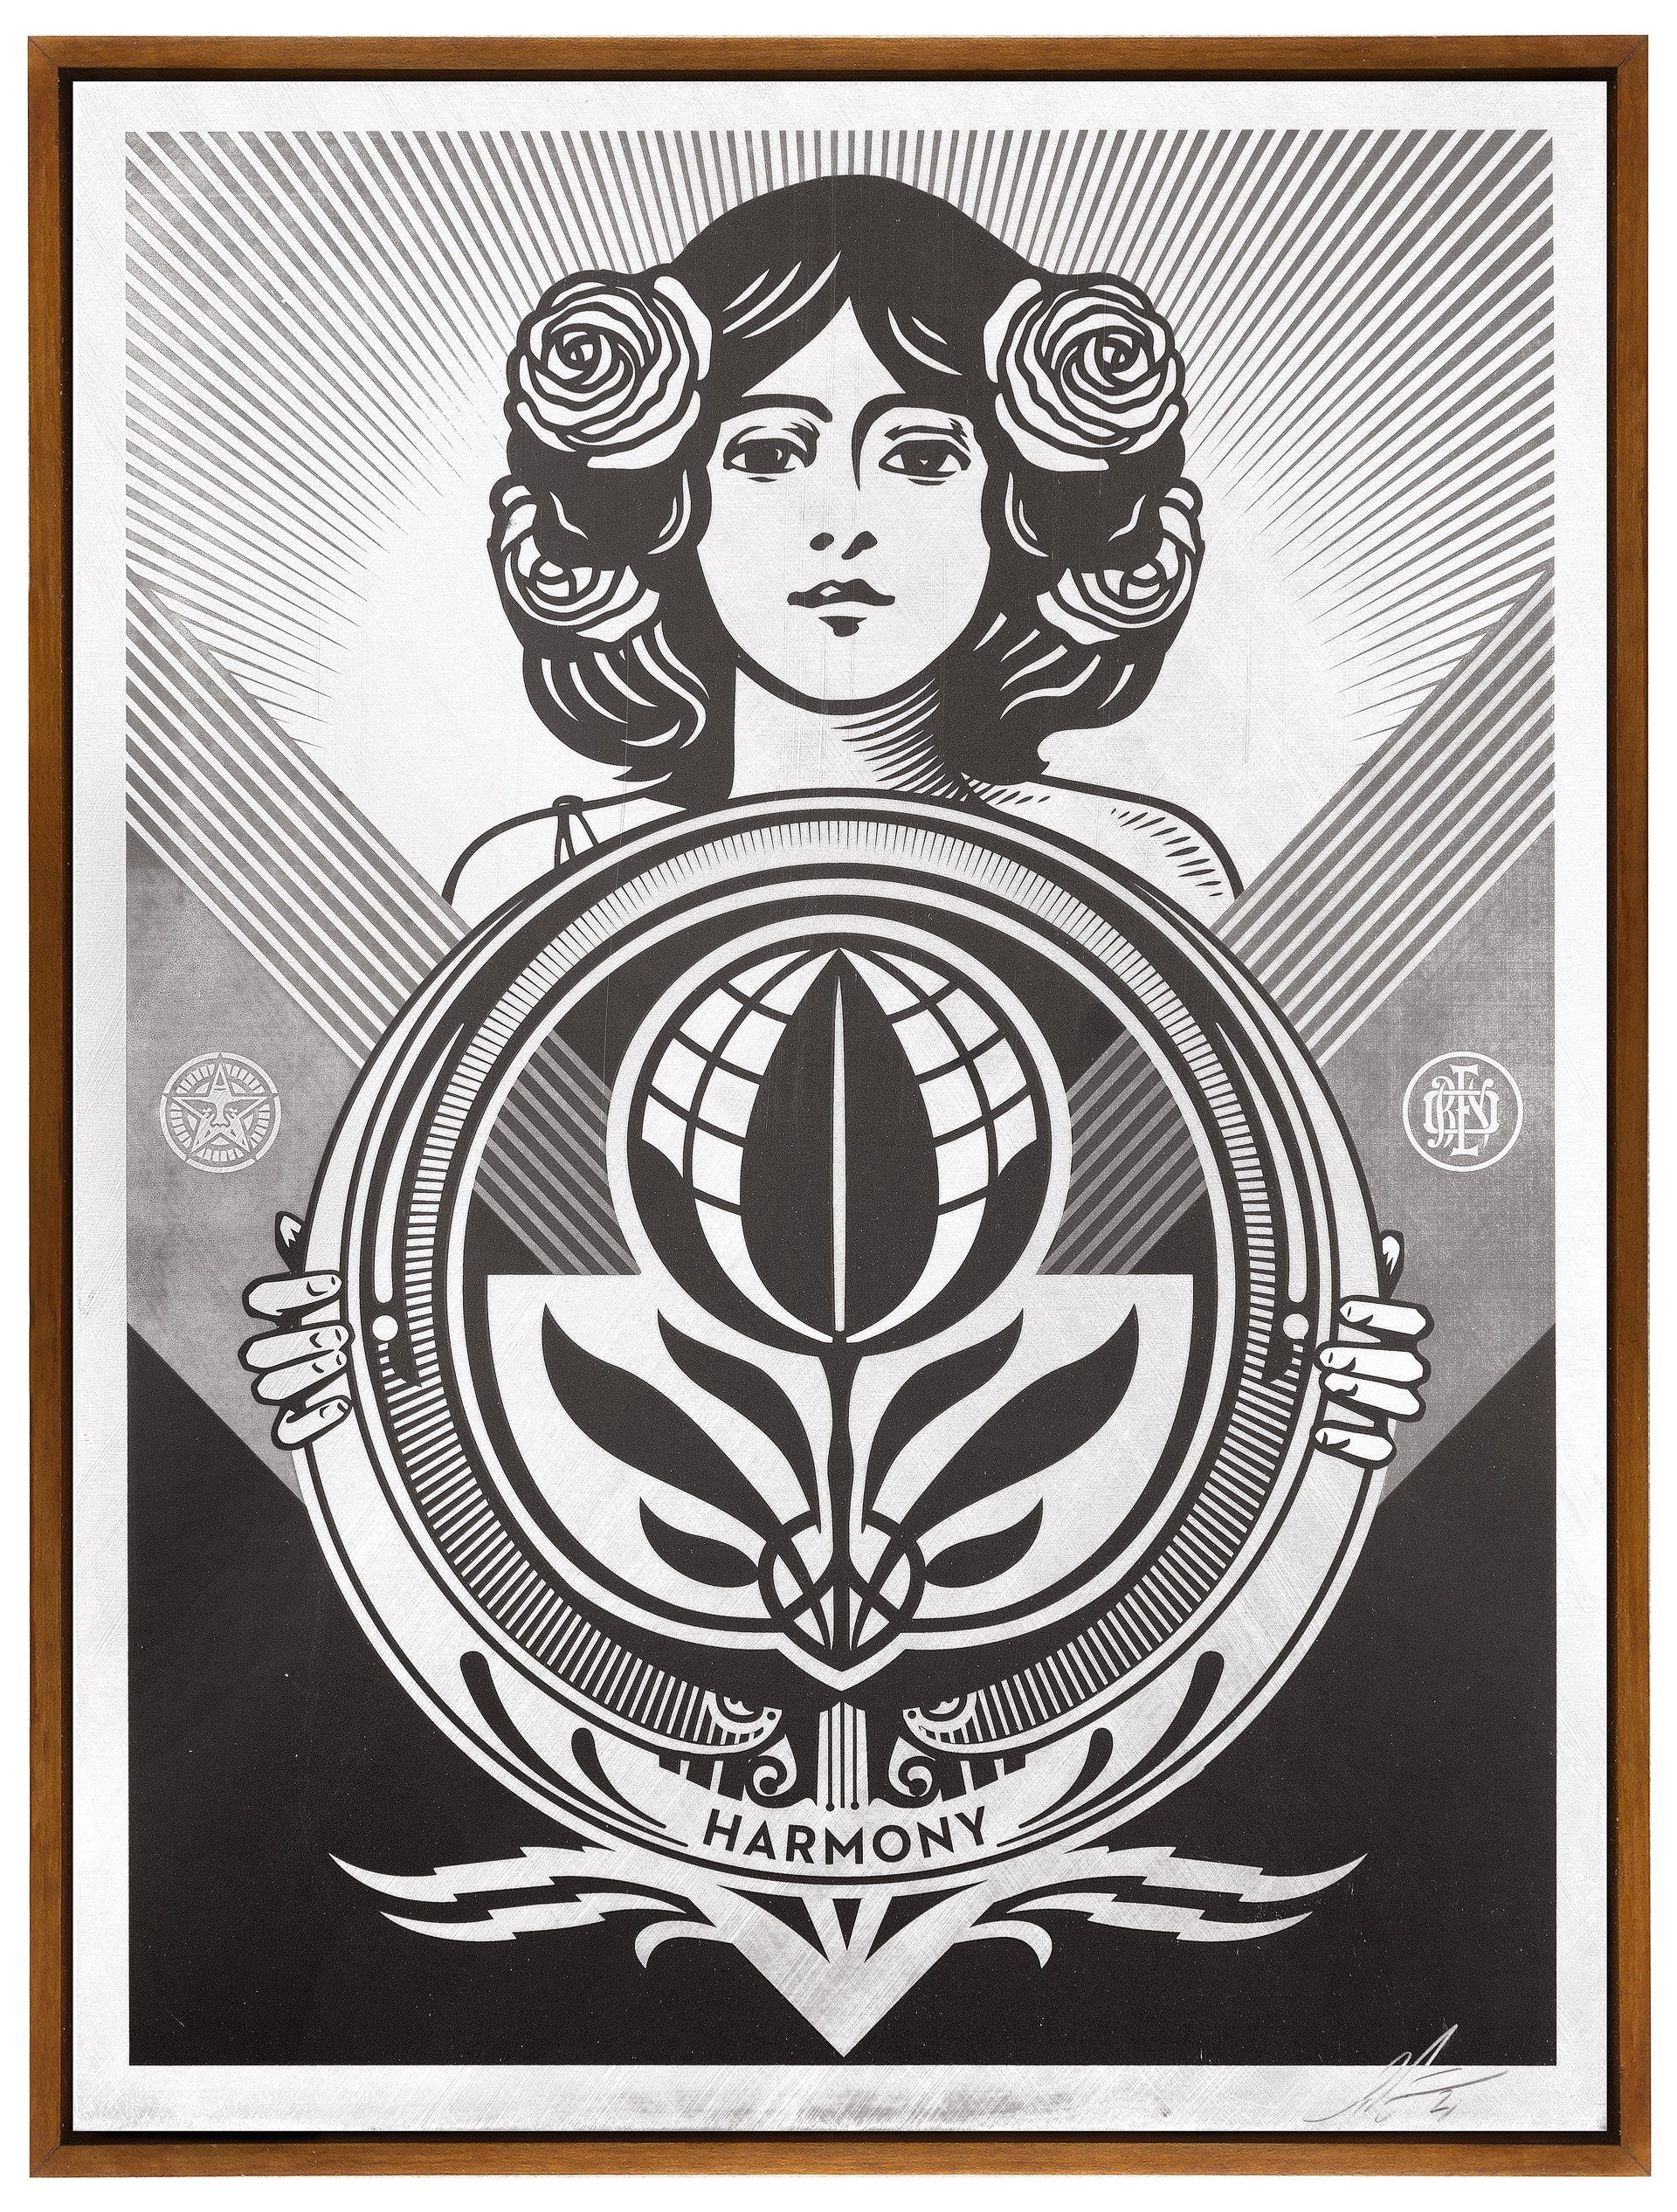 Protect Biodiversity-Cultivate Harmony by Shepard Fairey / Limited editions